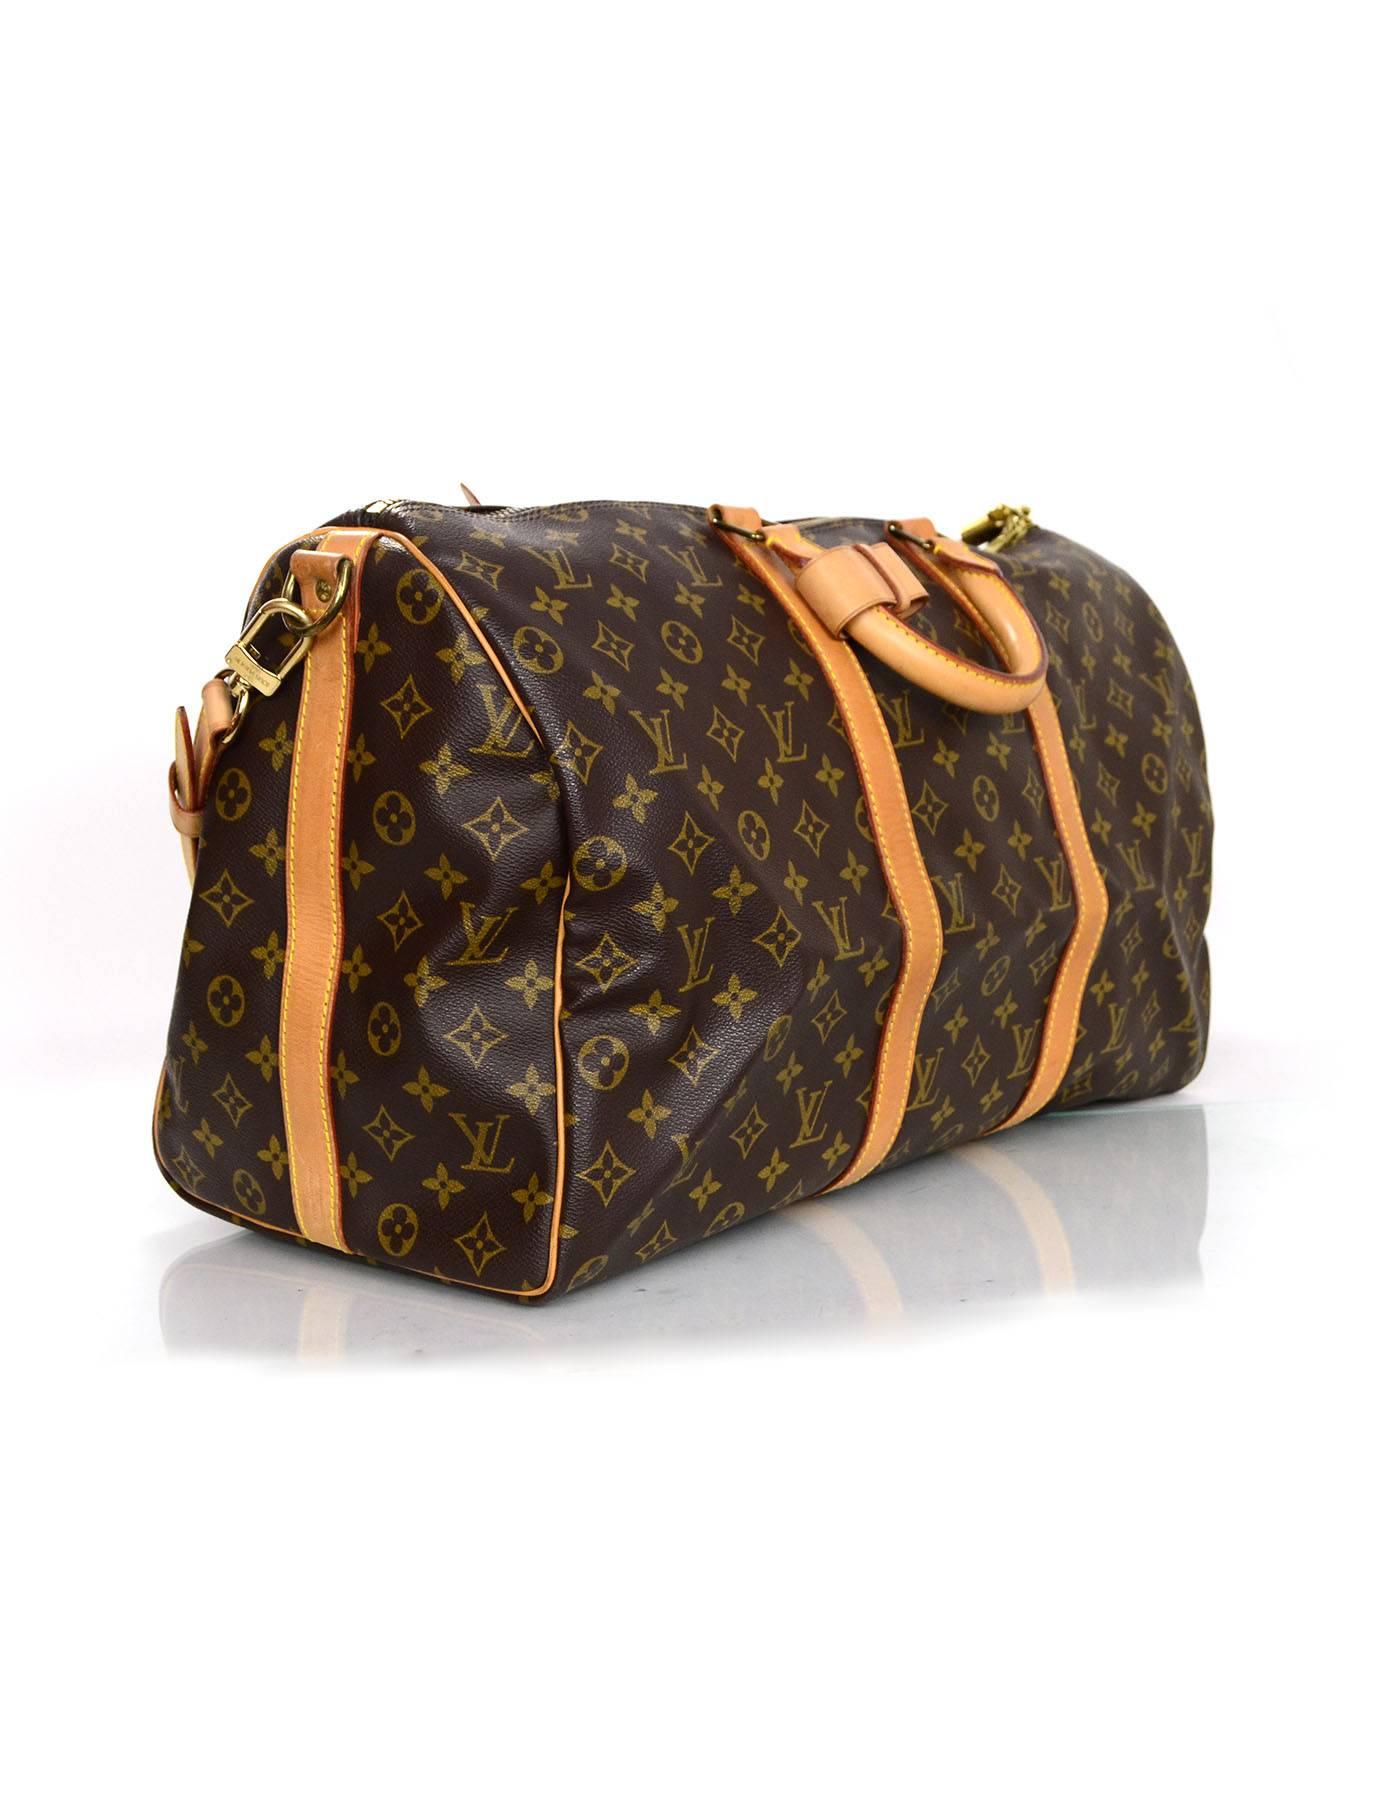 Louis Vuitton Monogram Keepall Bandouliere 50

Made In: France
Year of Production: 1989
Color: Brown and tan
Hardware: Goldtone
Materials: Coated canvas and leather
Lining: Brown canvas
Closure/Opening: zip across top
Exterior pockets: none
Interior